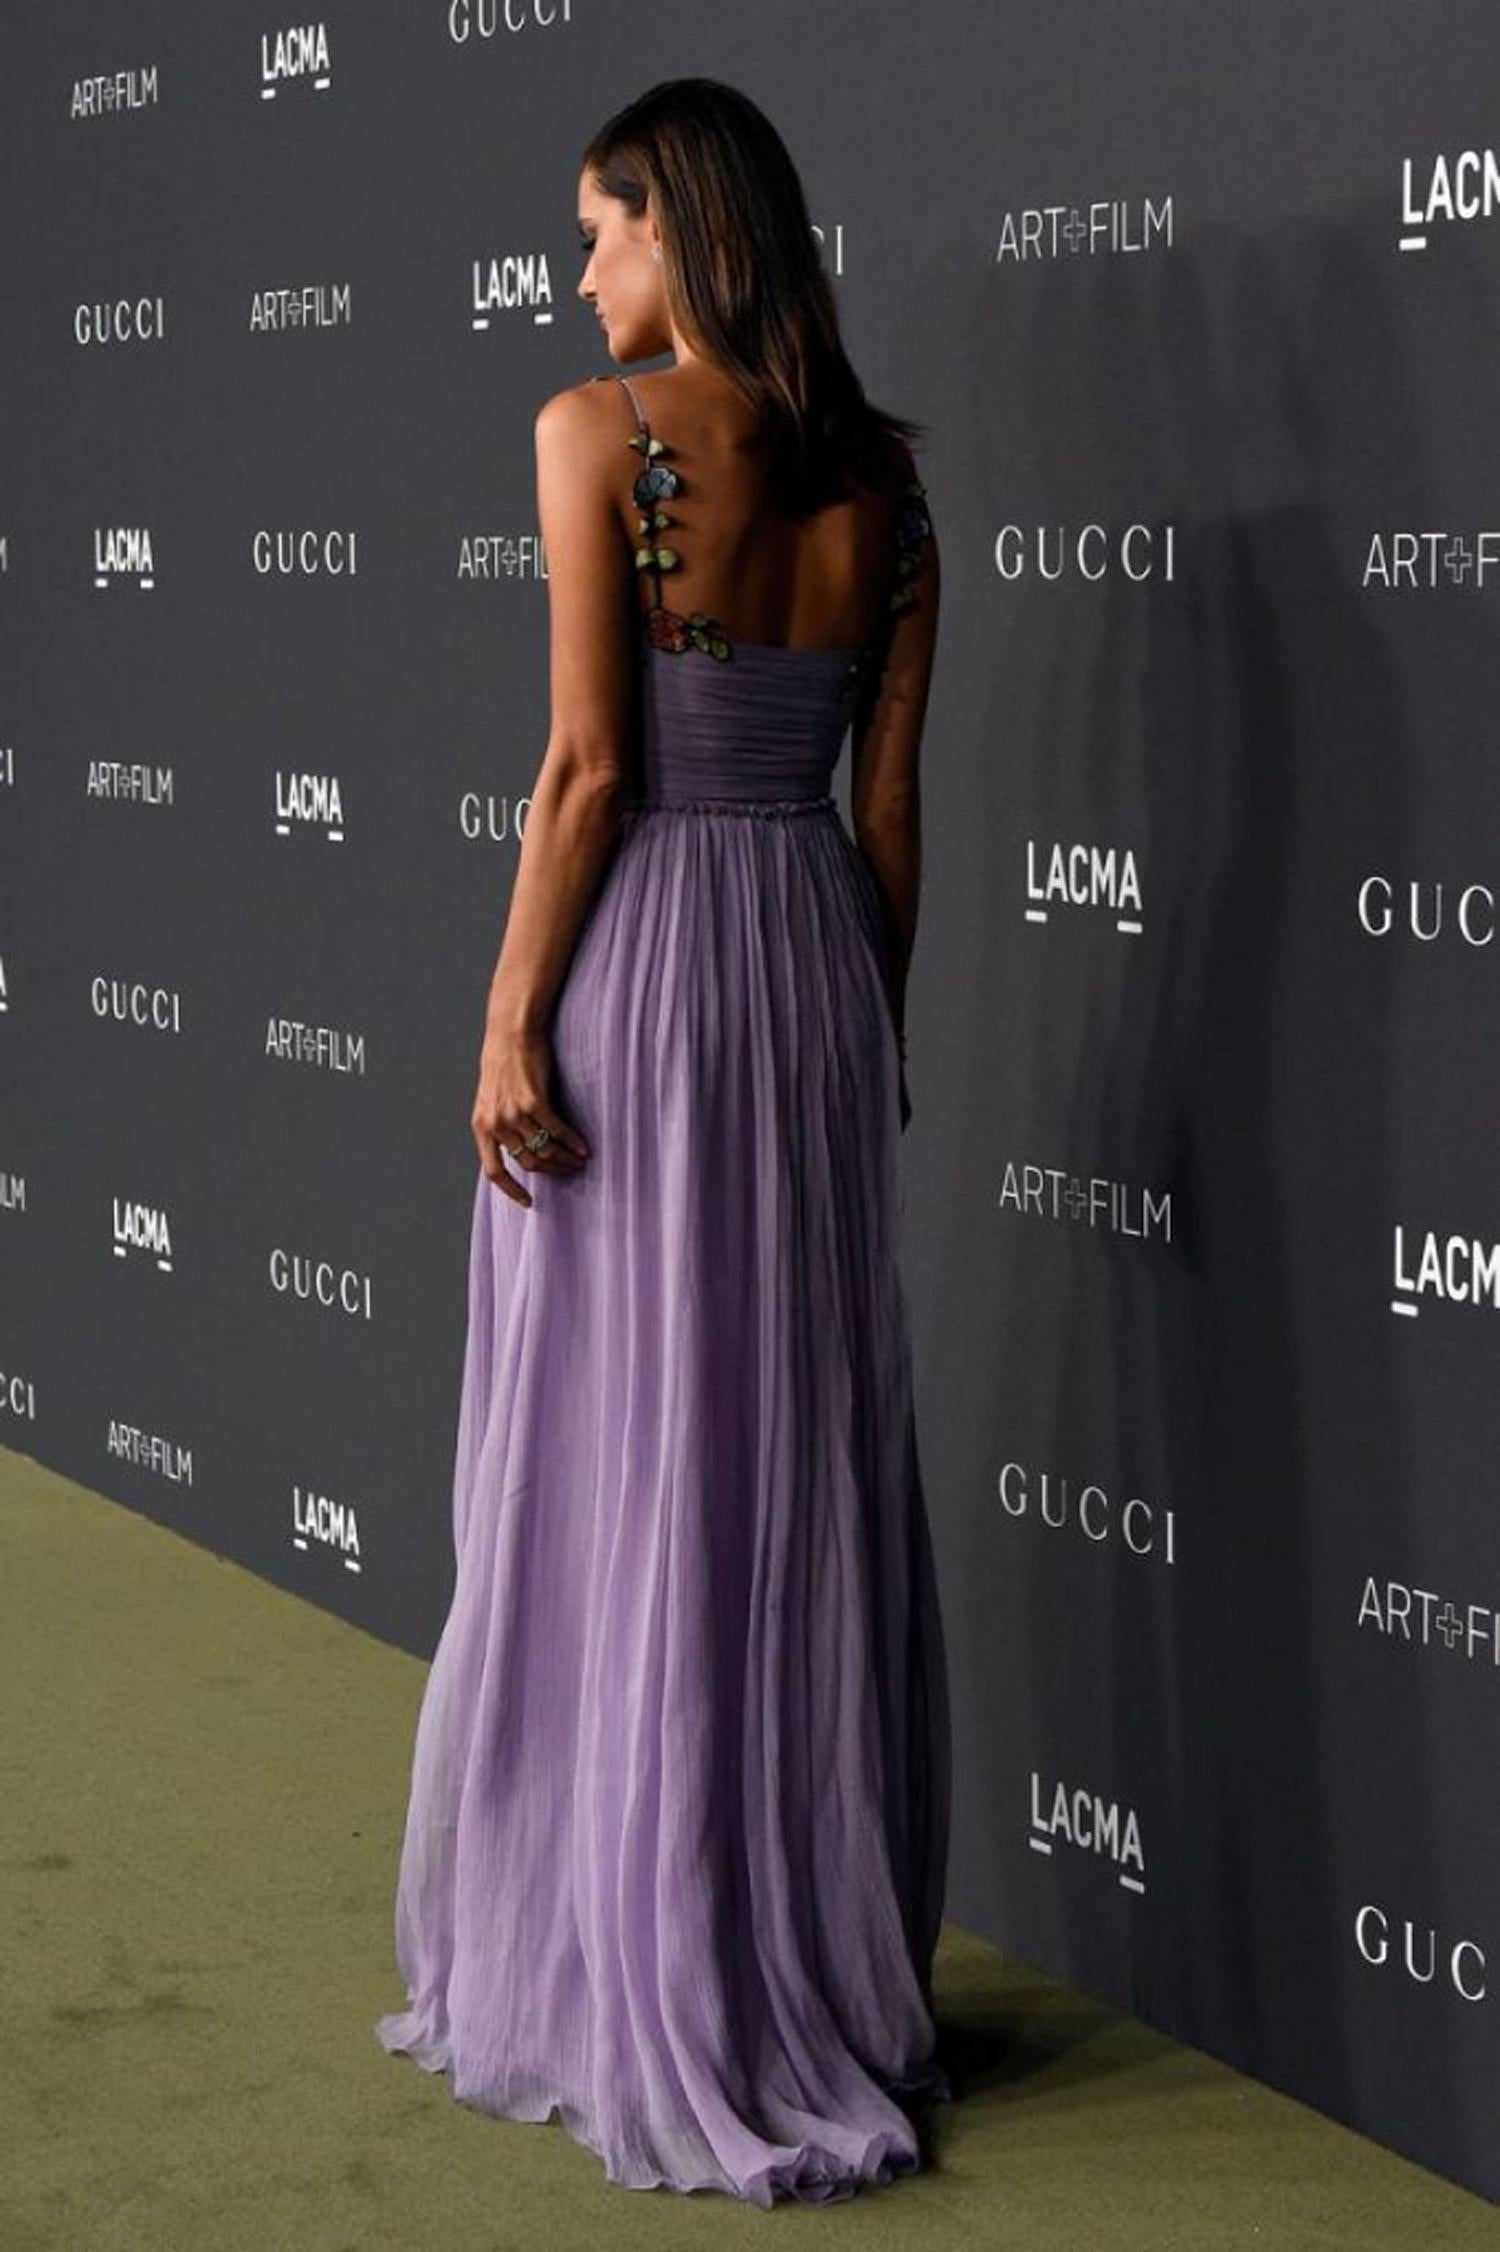 Women's New Gucci Silk Embroidered Lavender Dress Gown Worn by Alessandra Ambrosio It 42